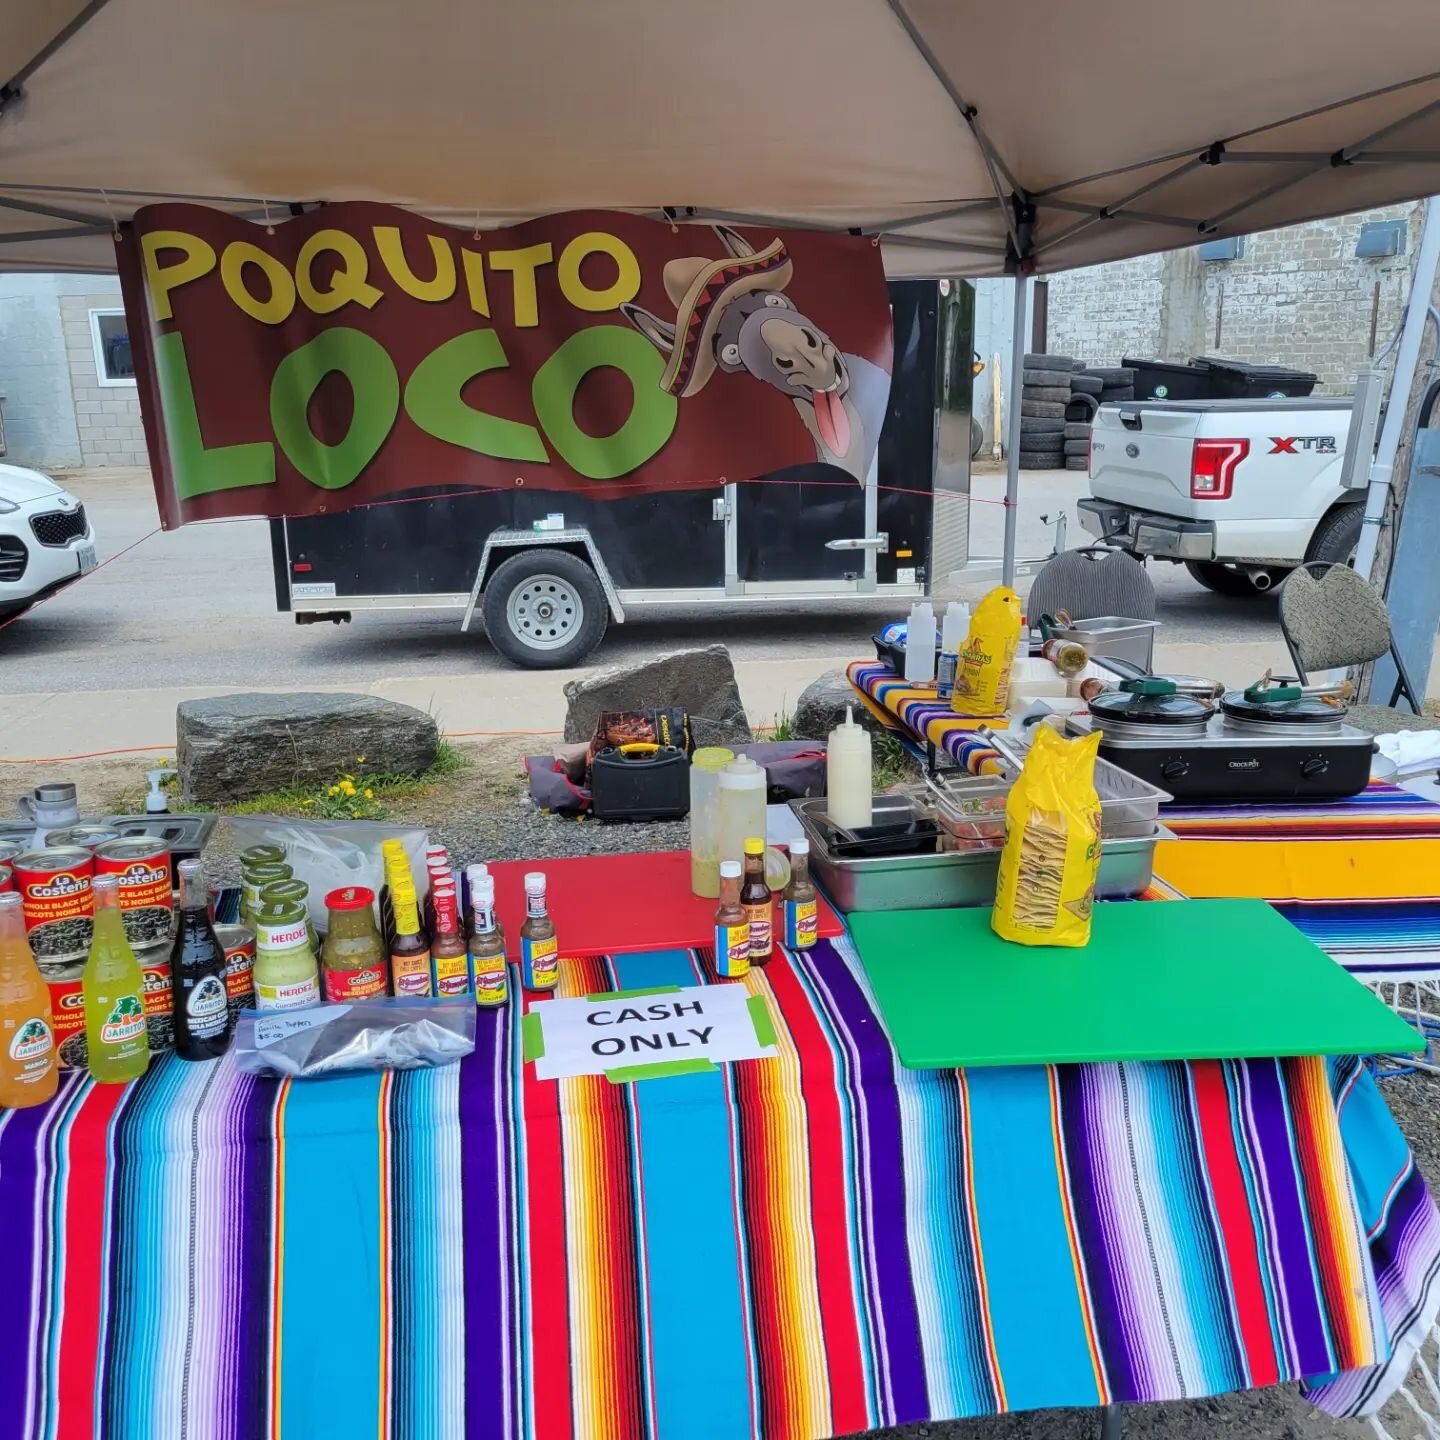 The Minden Farmers' Market now has tacos! Come and get some from 10-2 in downtown Minden corner of prince and milne st.--you won't be sorry! @poquito.loco.hali 
.
.
.
.
#eatlocal #tacos #forever #pollo #beans #vegetarian #buycloseby #supportsmallbusi